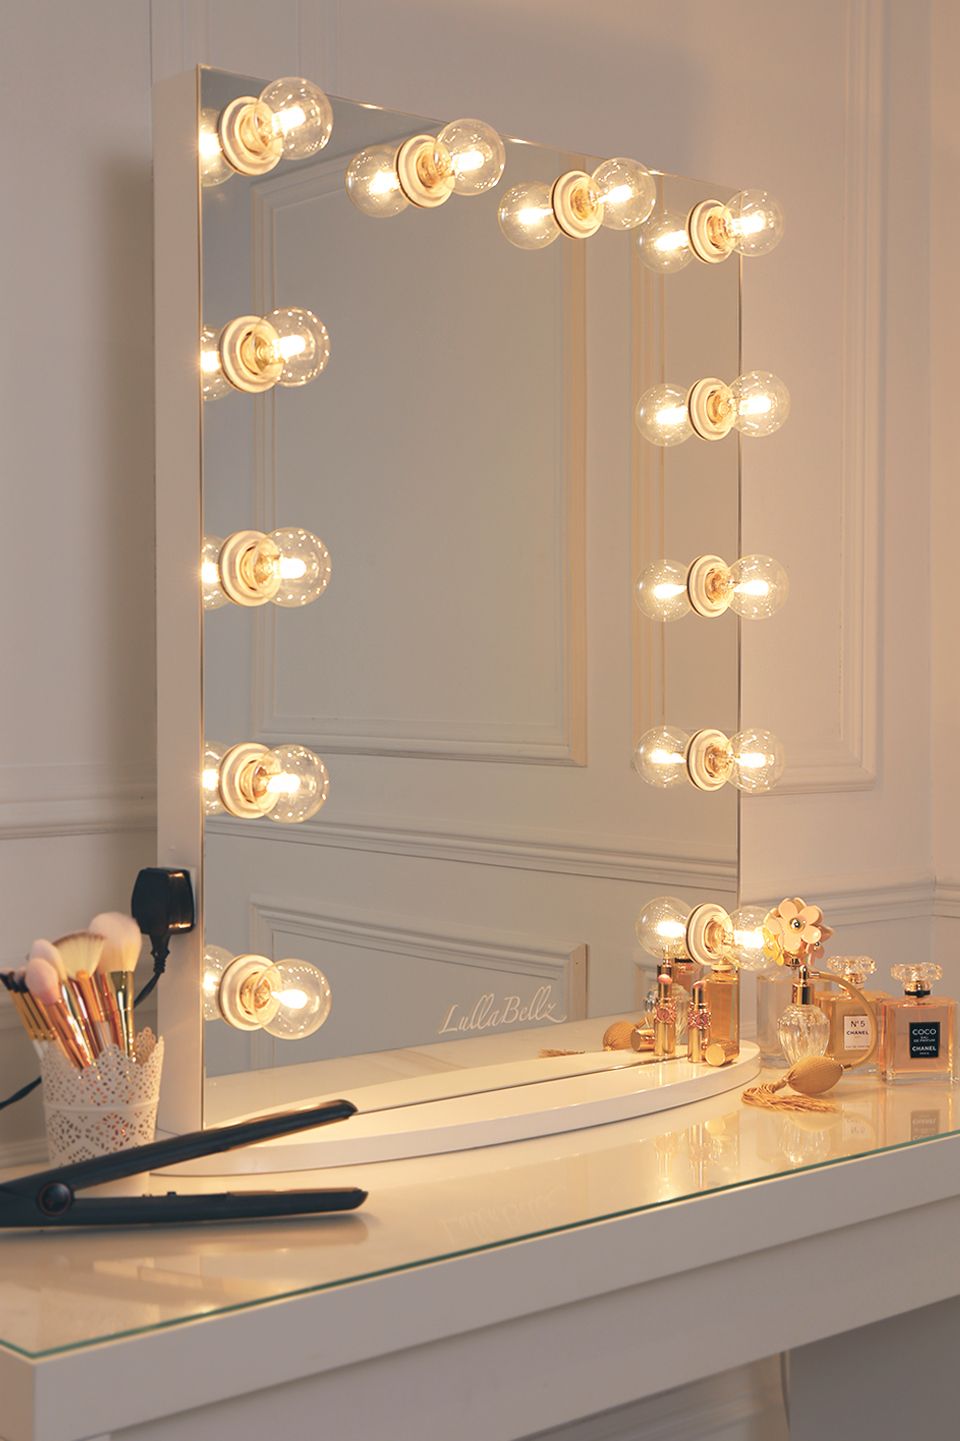 Make up mirror with yellow lights turned on.